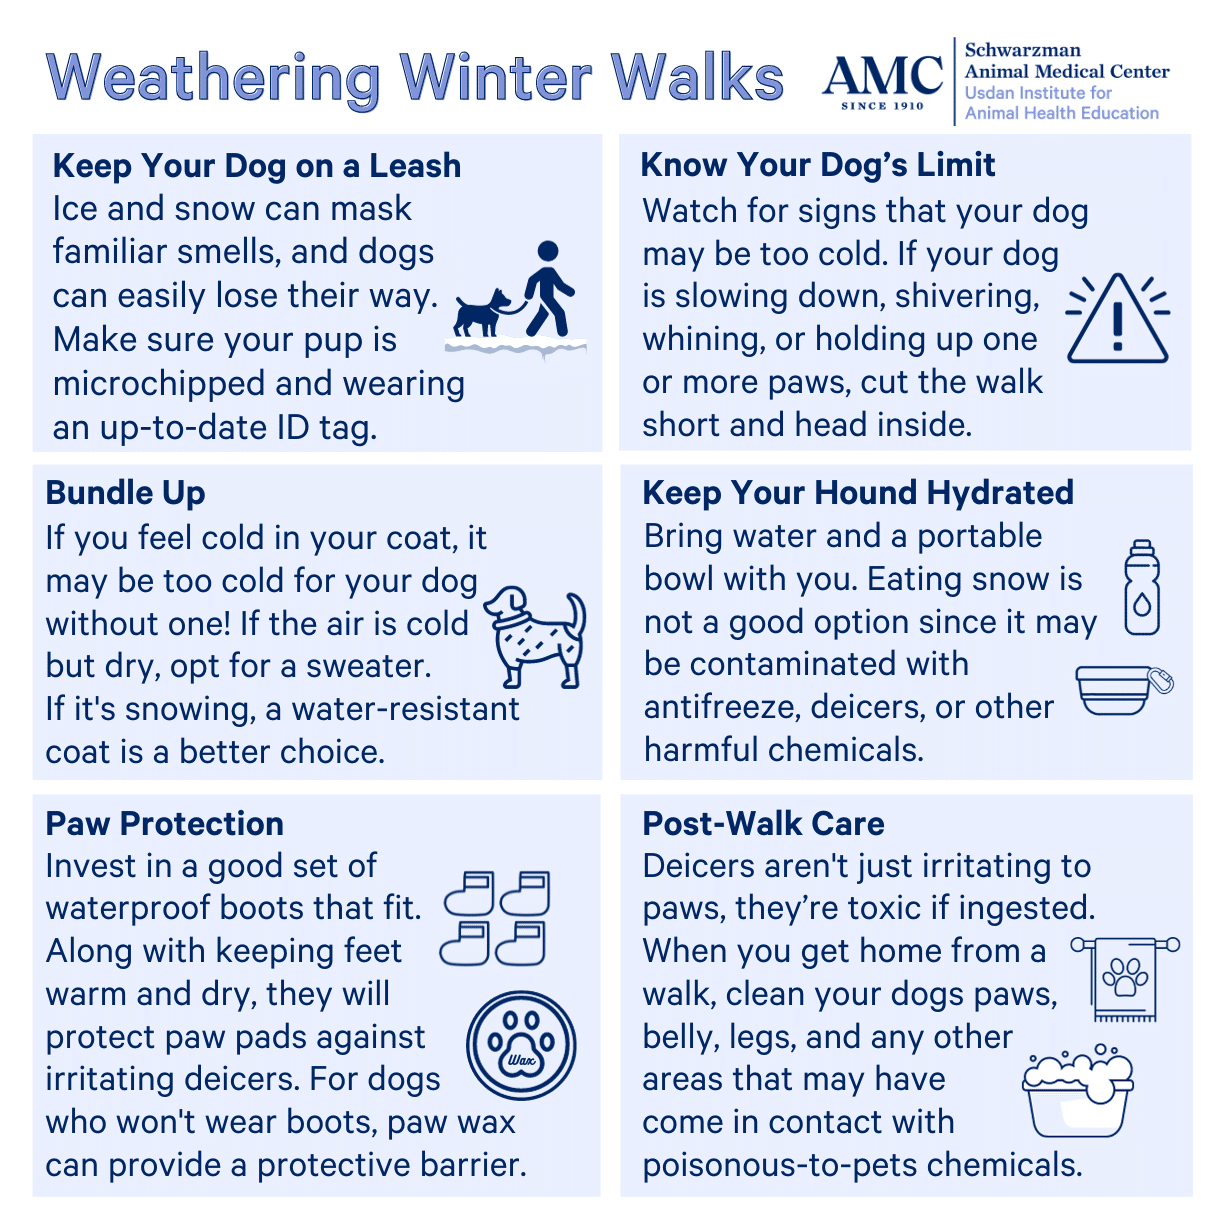 Weathering Winter Walks. Keep Your Dog on a Leash. Ice and snow can mask familiar smells, and dogs can easily lose their way. Make sure your pup is microchipped and wearing an up-to-date ID tag. Know Your Dog’s Limit. Watch for signs that your dog may be too cold. If your dog is slowing down, shivering, whining, or holding up one or more paws, cut the walk short and head inside. Bundle Up. If you feel cold in your coat, it may be too cold for your dog without one! If the air is cold but dry, opt for a sweater. If it’s snowing, a water-resistant coat is a better choice. Keep Your Hound Hydrated. Bring water and a portable bowl with you. Eating snow is not a good option since it may be contaminated with antifreeze, deicers, or other harmful chemicals. Paw Protection. Invest in a good set of waterproof boots that fit. Along with keeping feet warm and dry, they will protect paw pads against irritating deicers. For dogs who won’t wear boots, paw wax can provide a protective barrier. Post-Walk Care. Deicers aren’t just irritating to paws, they’re toxic if ingested. When you get home from a walk, clean your dog’s paws, belly, legs, and any other areas that may have come in contact with poisonous-to-pets chemicals.